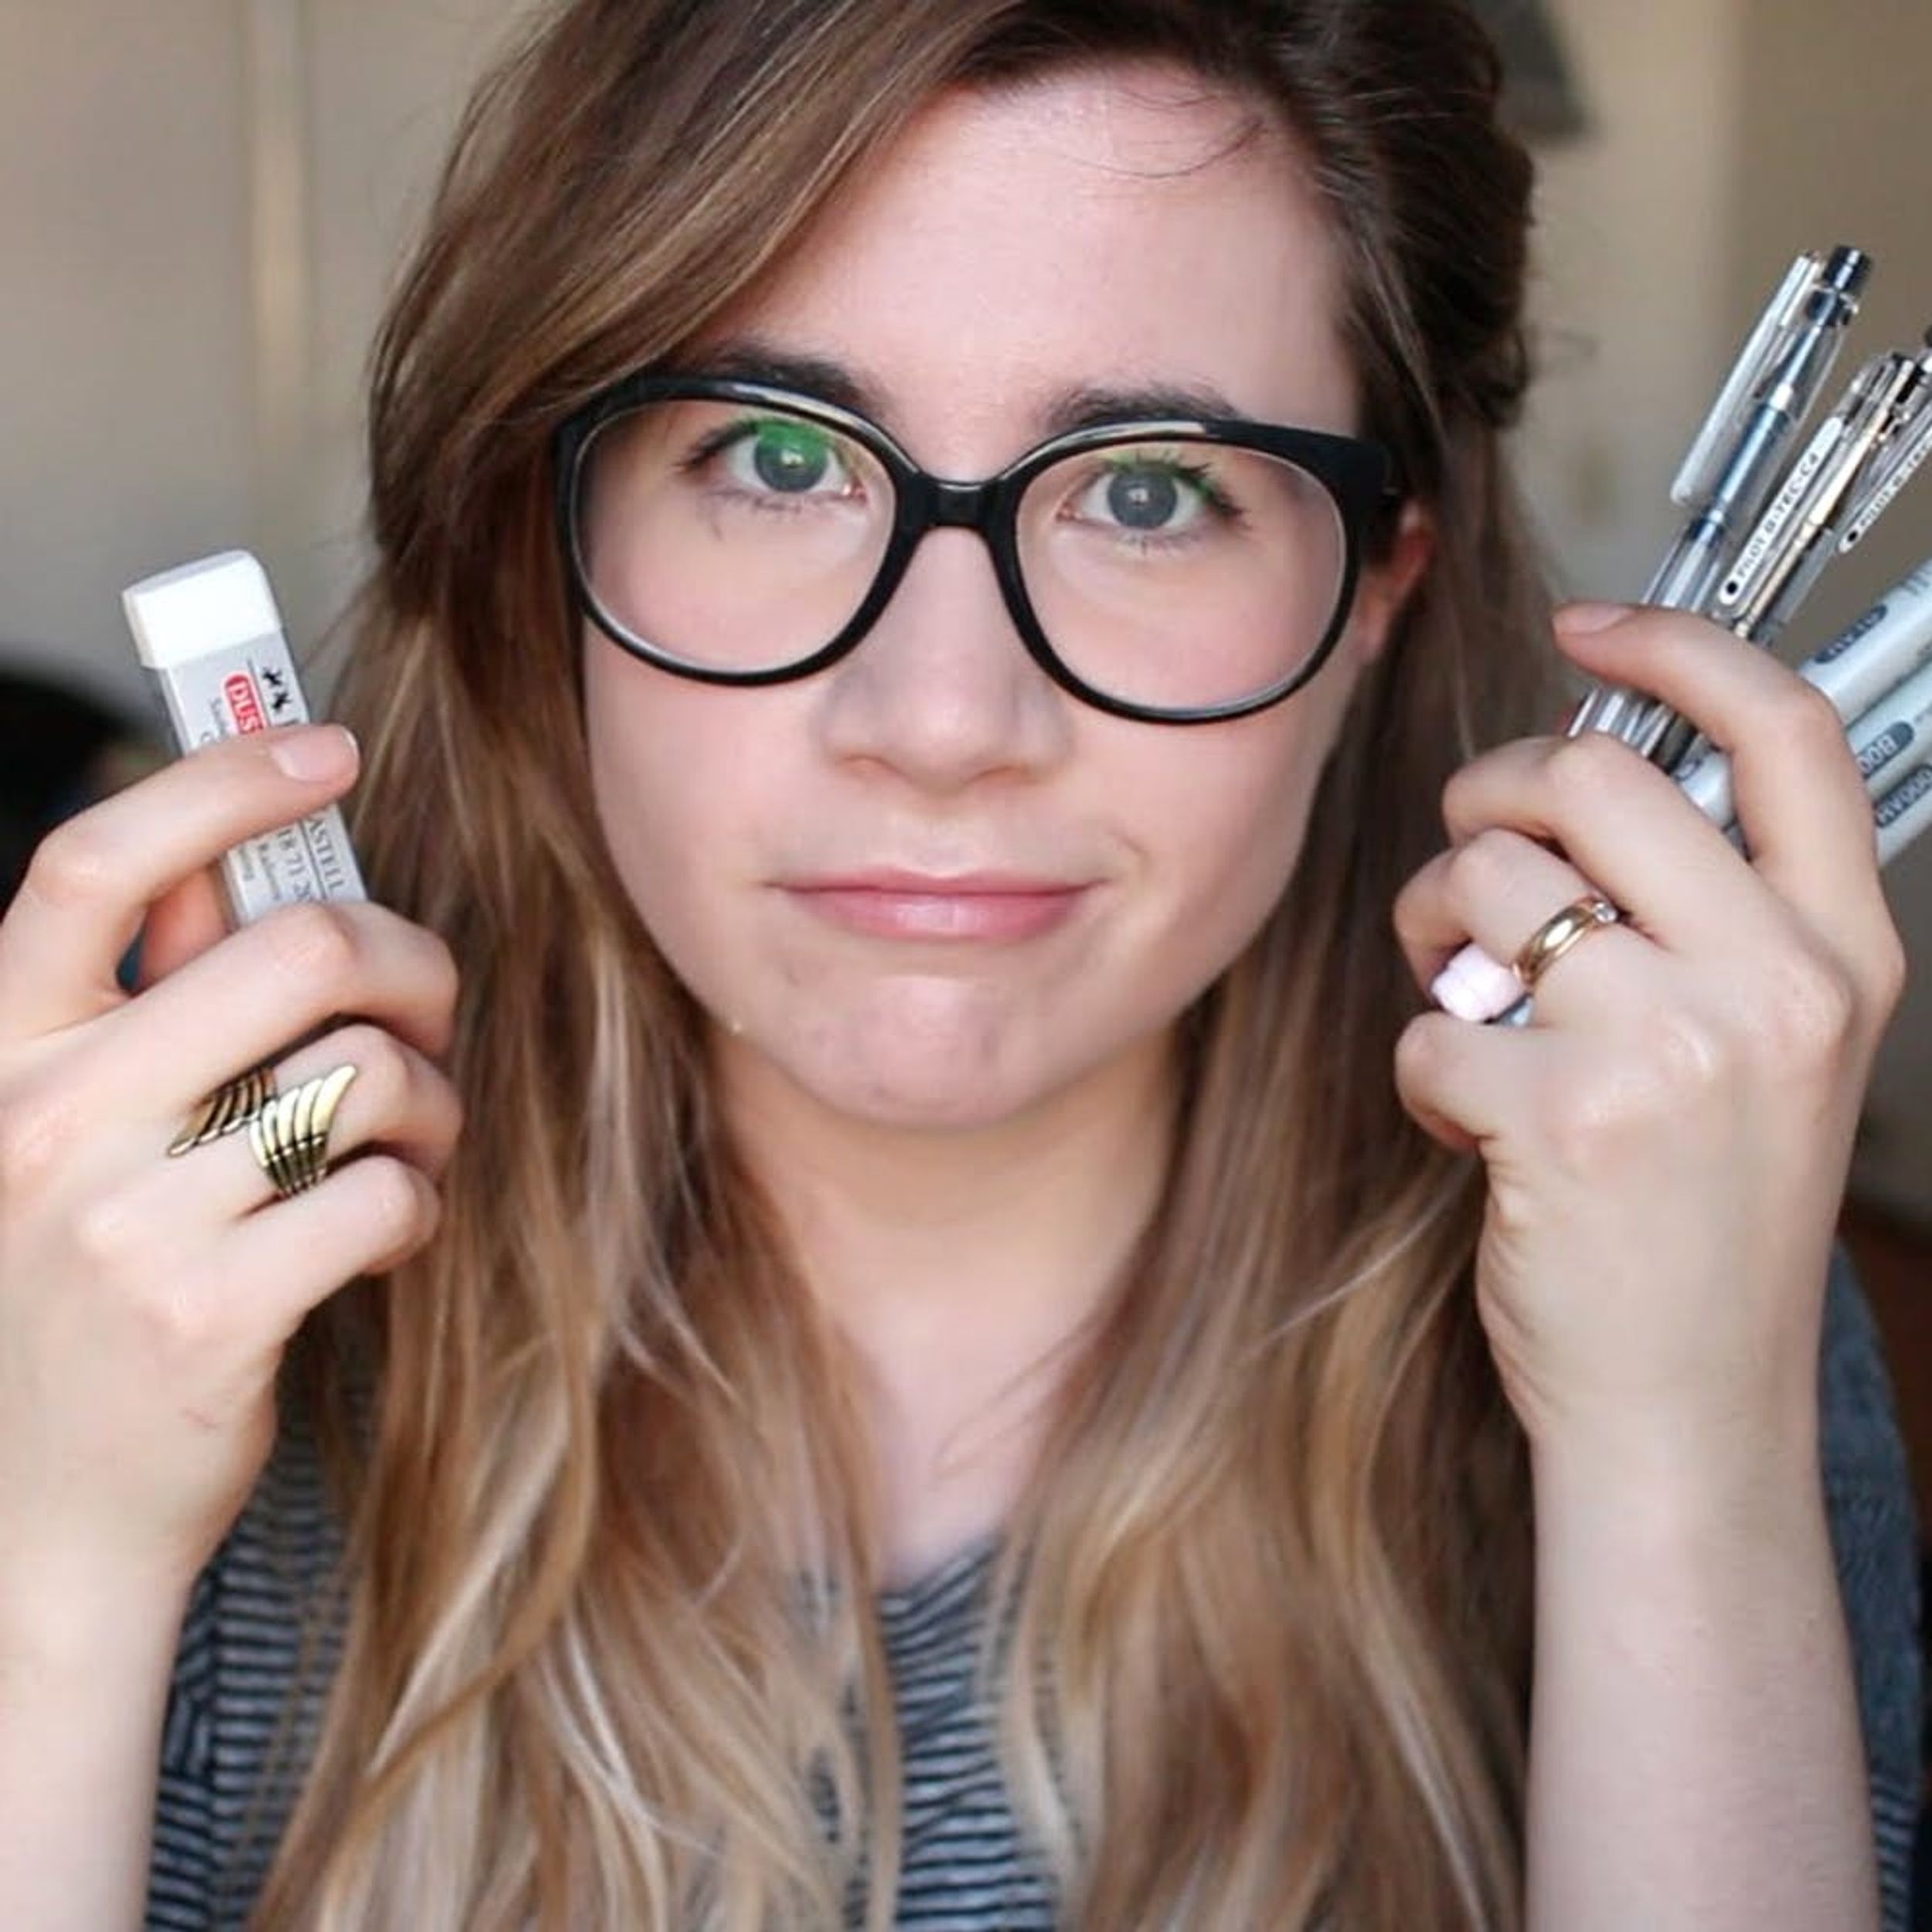 10 Incredibly Inspiring Lady YouTubers You Probably Don’t Know